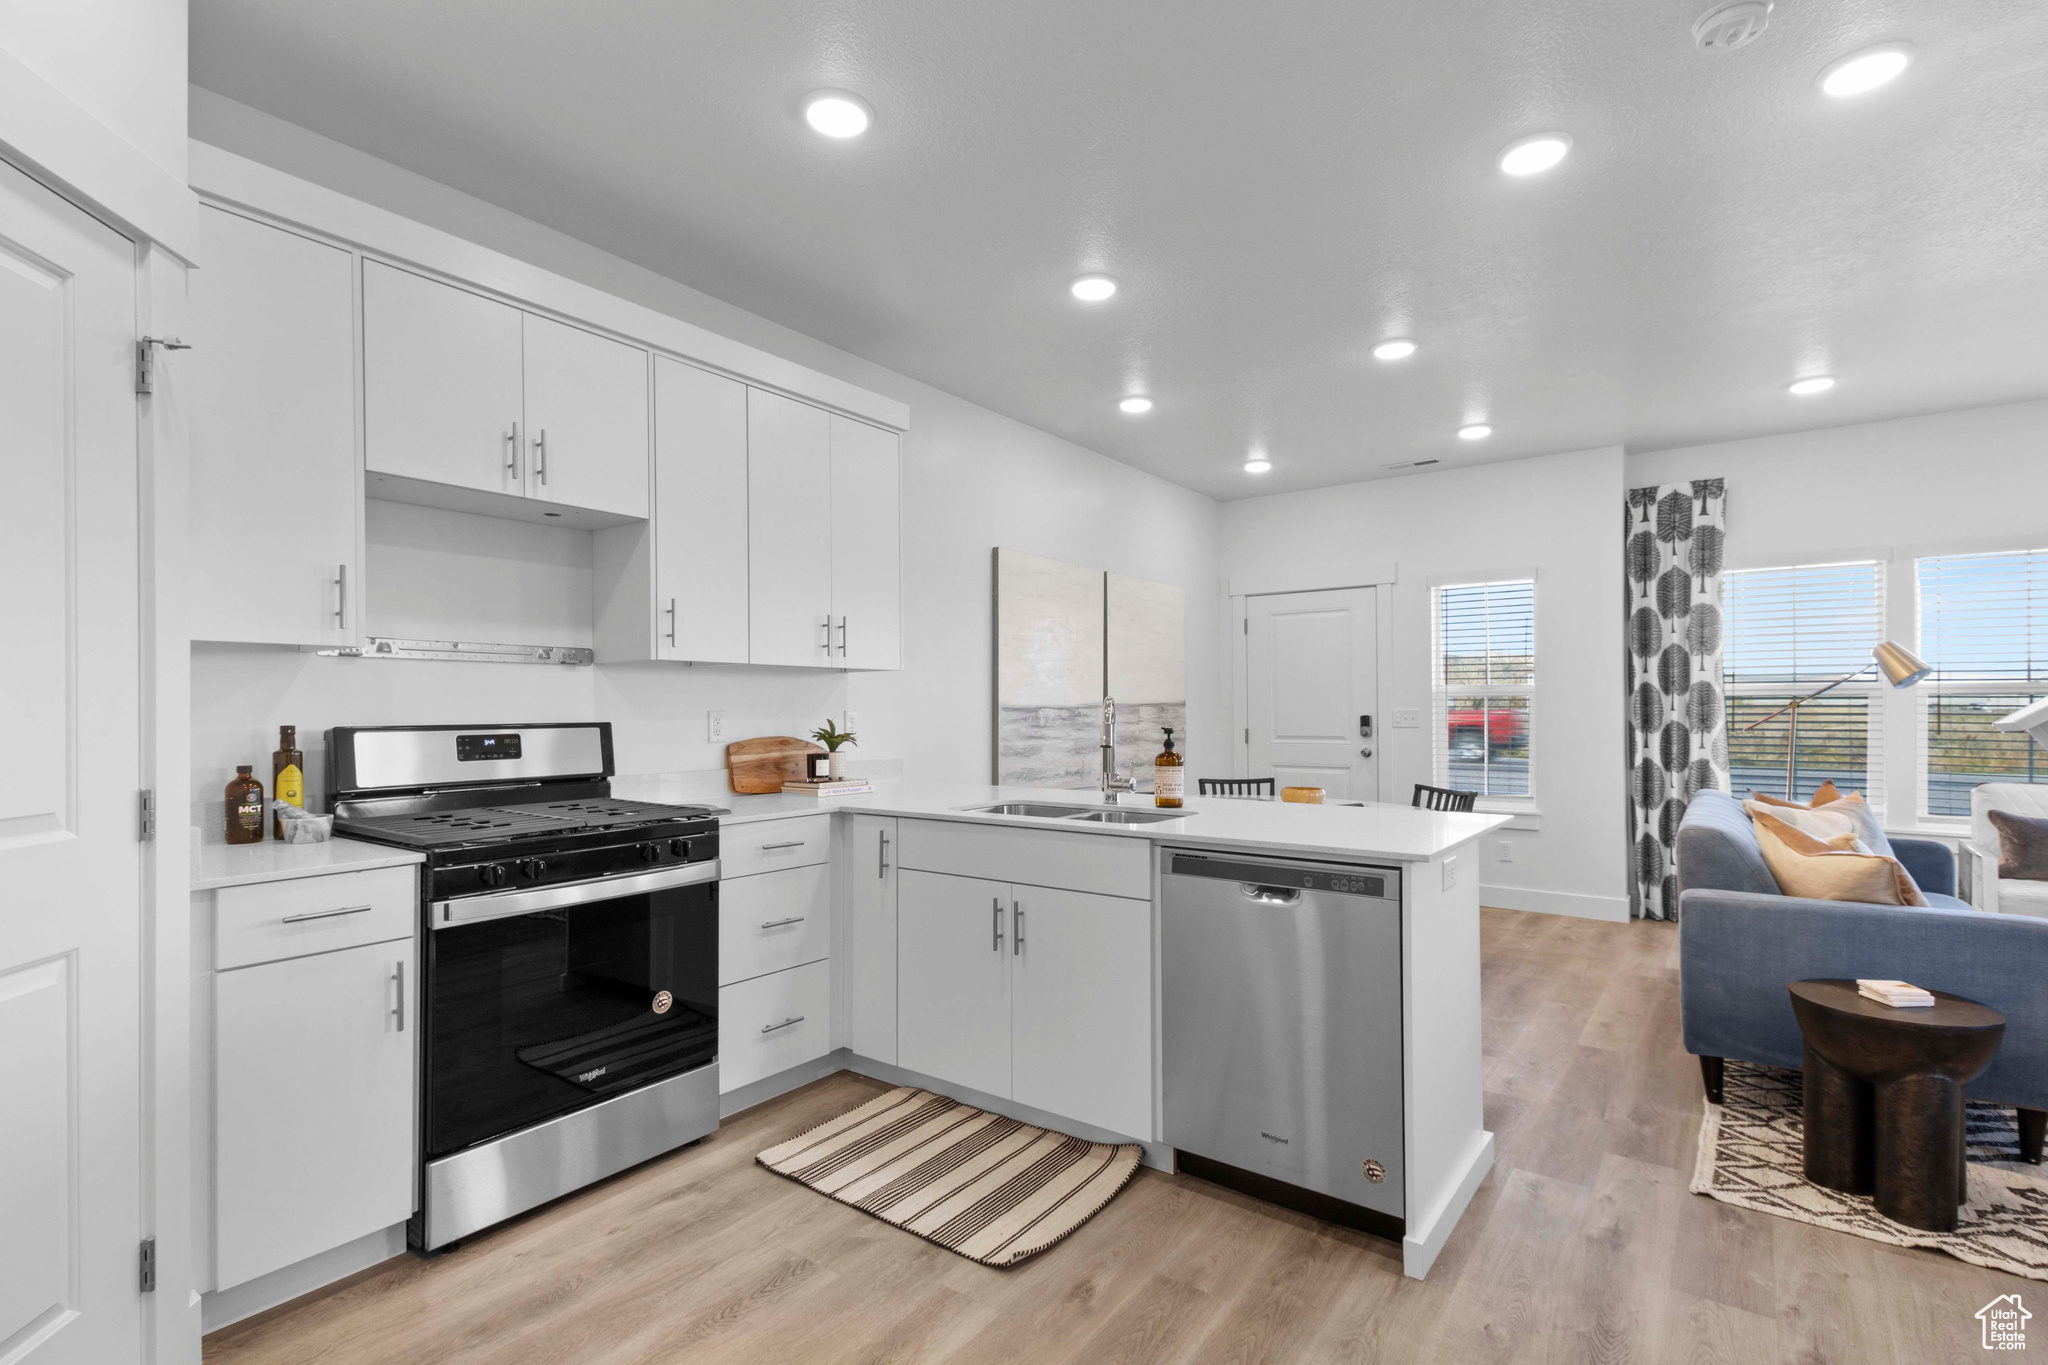 Kitchen with light hardwood / wood-style floors, appliances with stainless steel finishes, white cabinetry, and sink